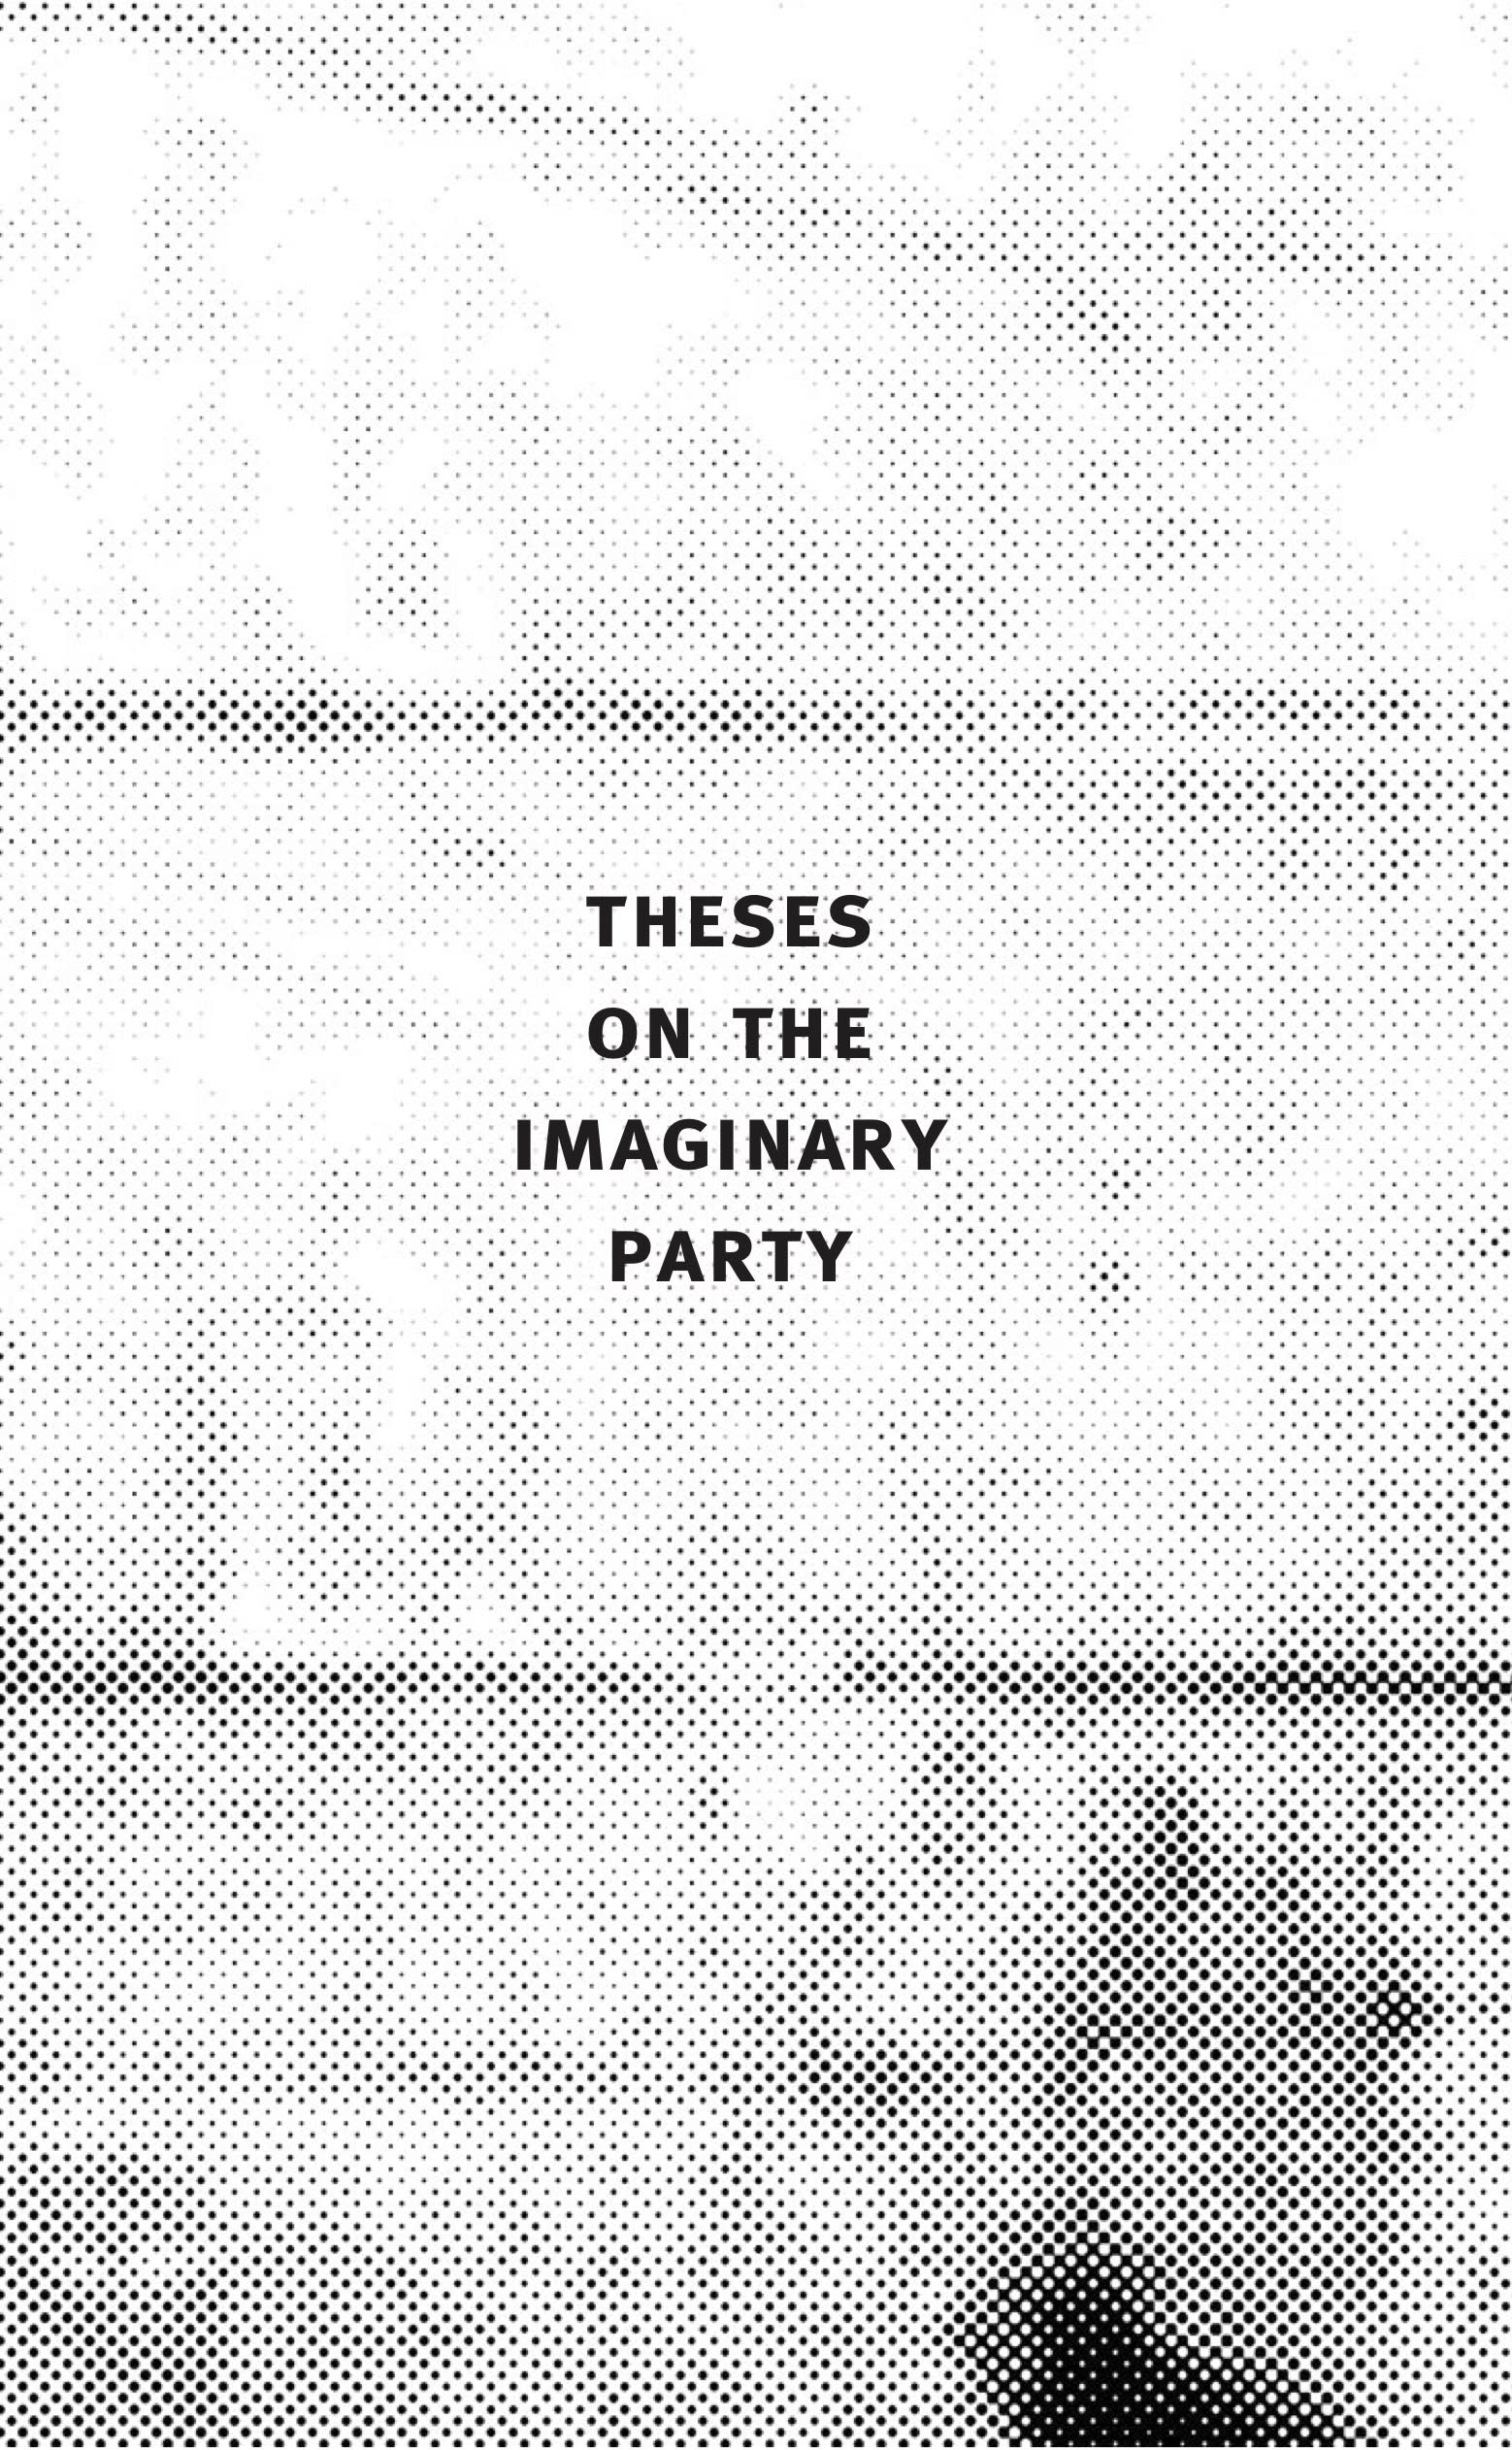 Cover Image for Theses on the Imaginary Party